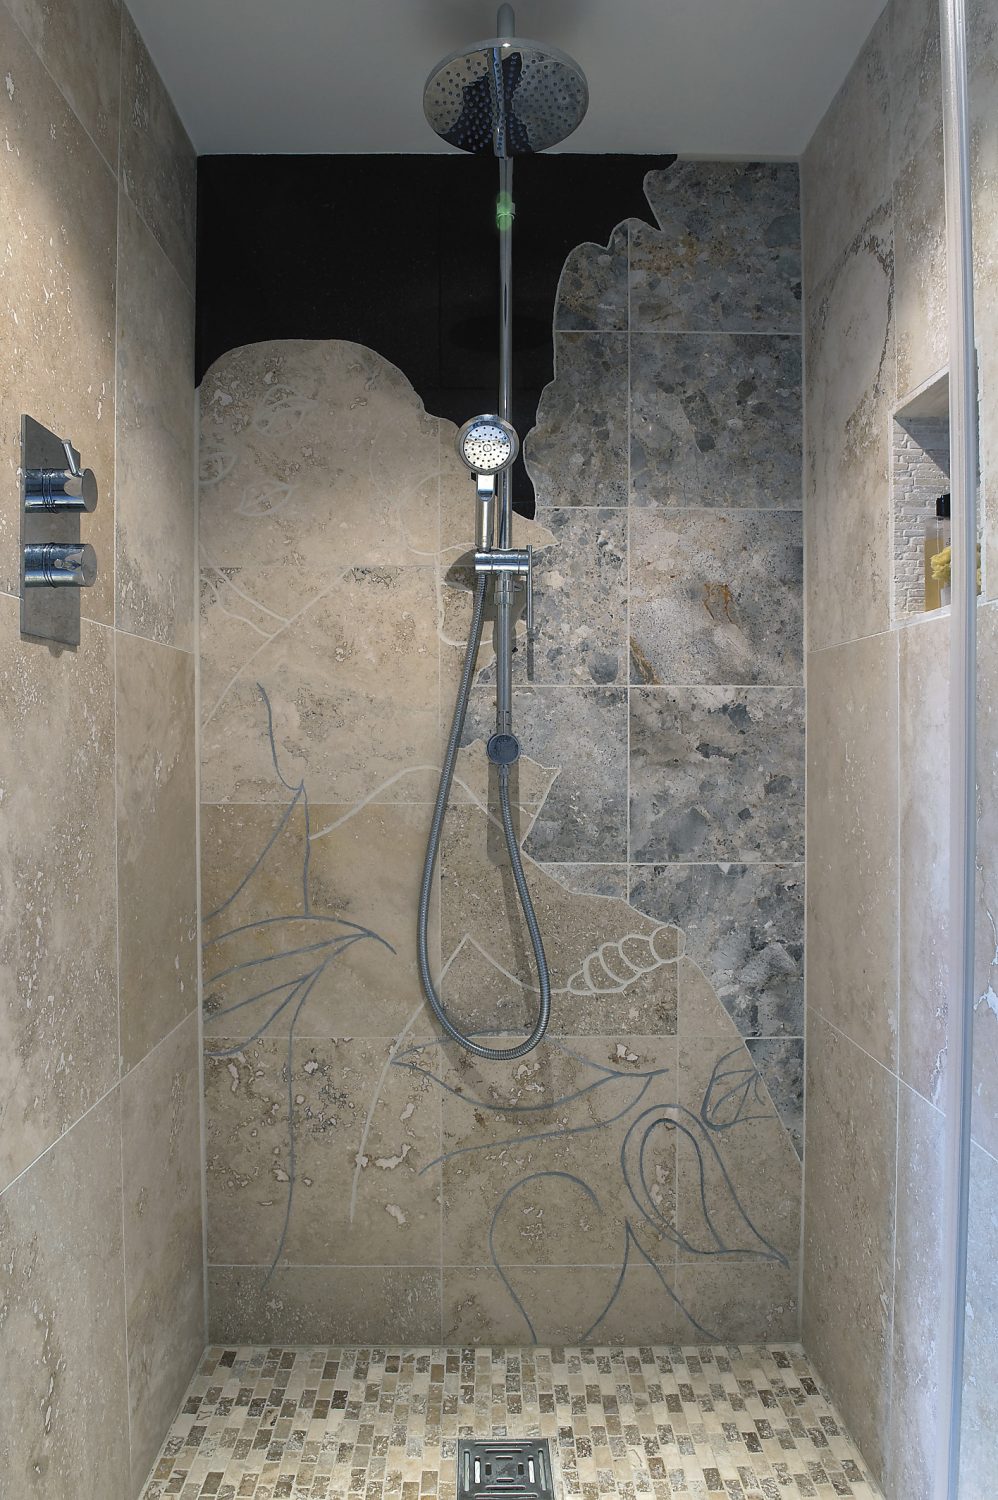 Sally hand cut the stone in her walk-in shower to create a design by her brother, the artist Gary Hume